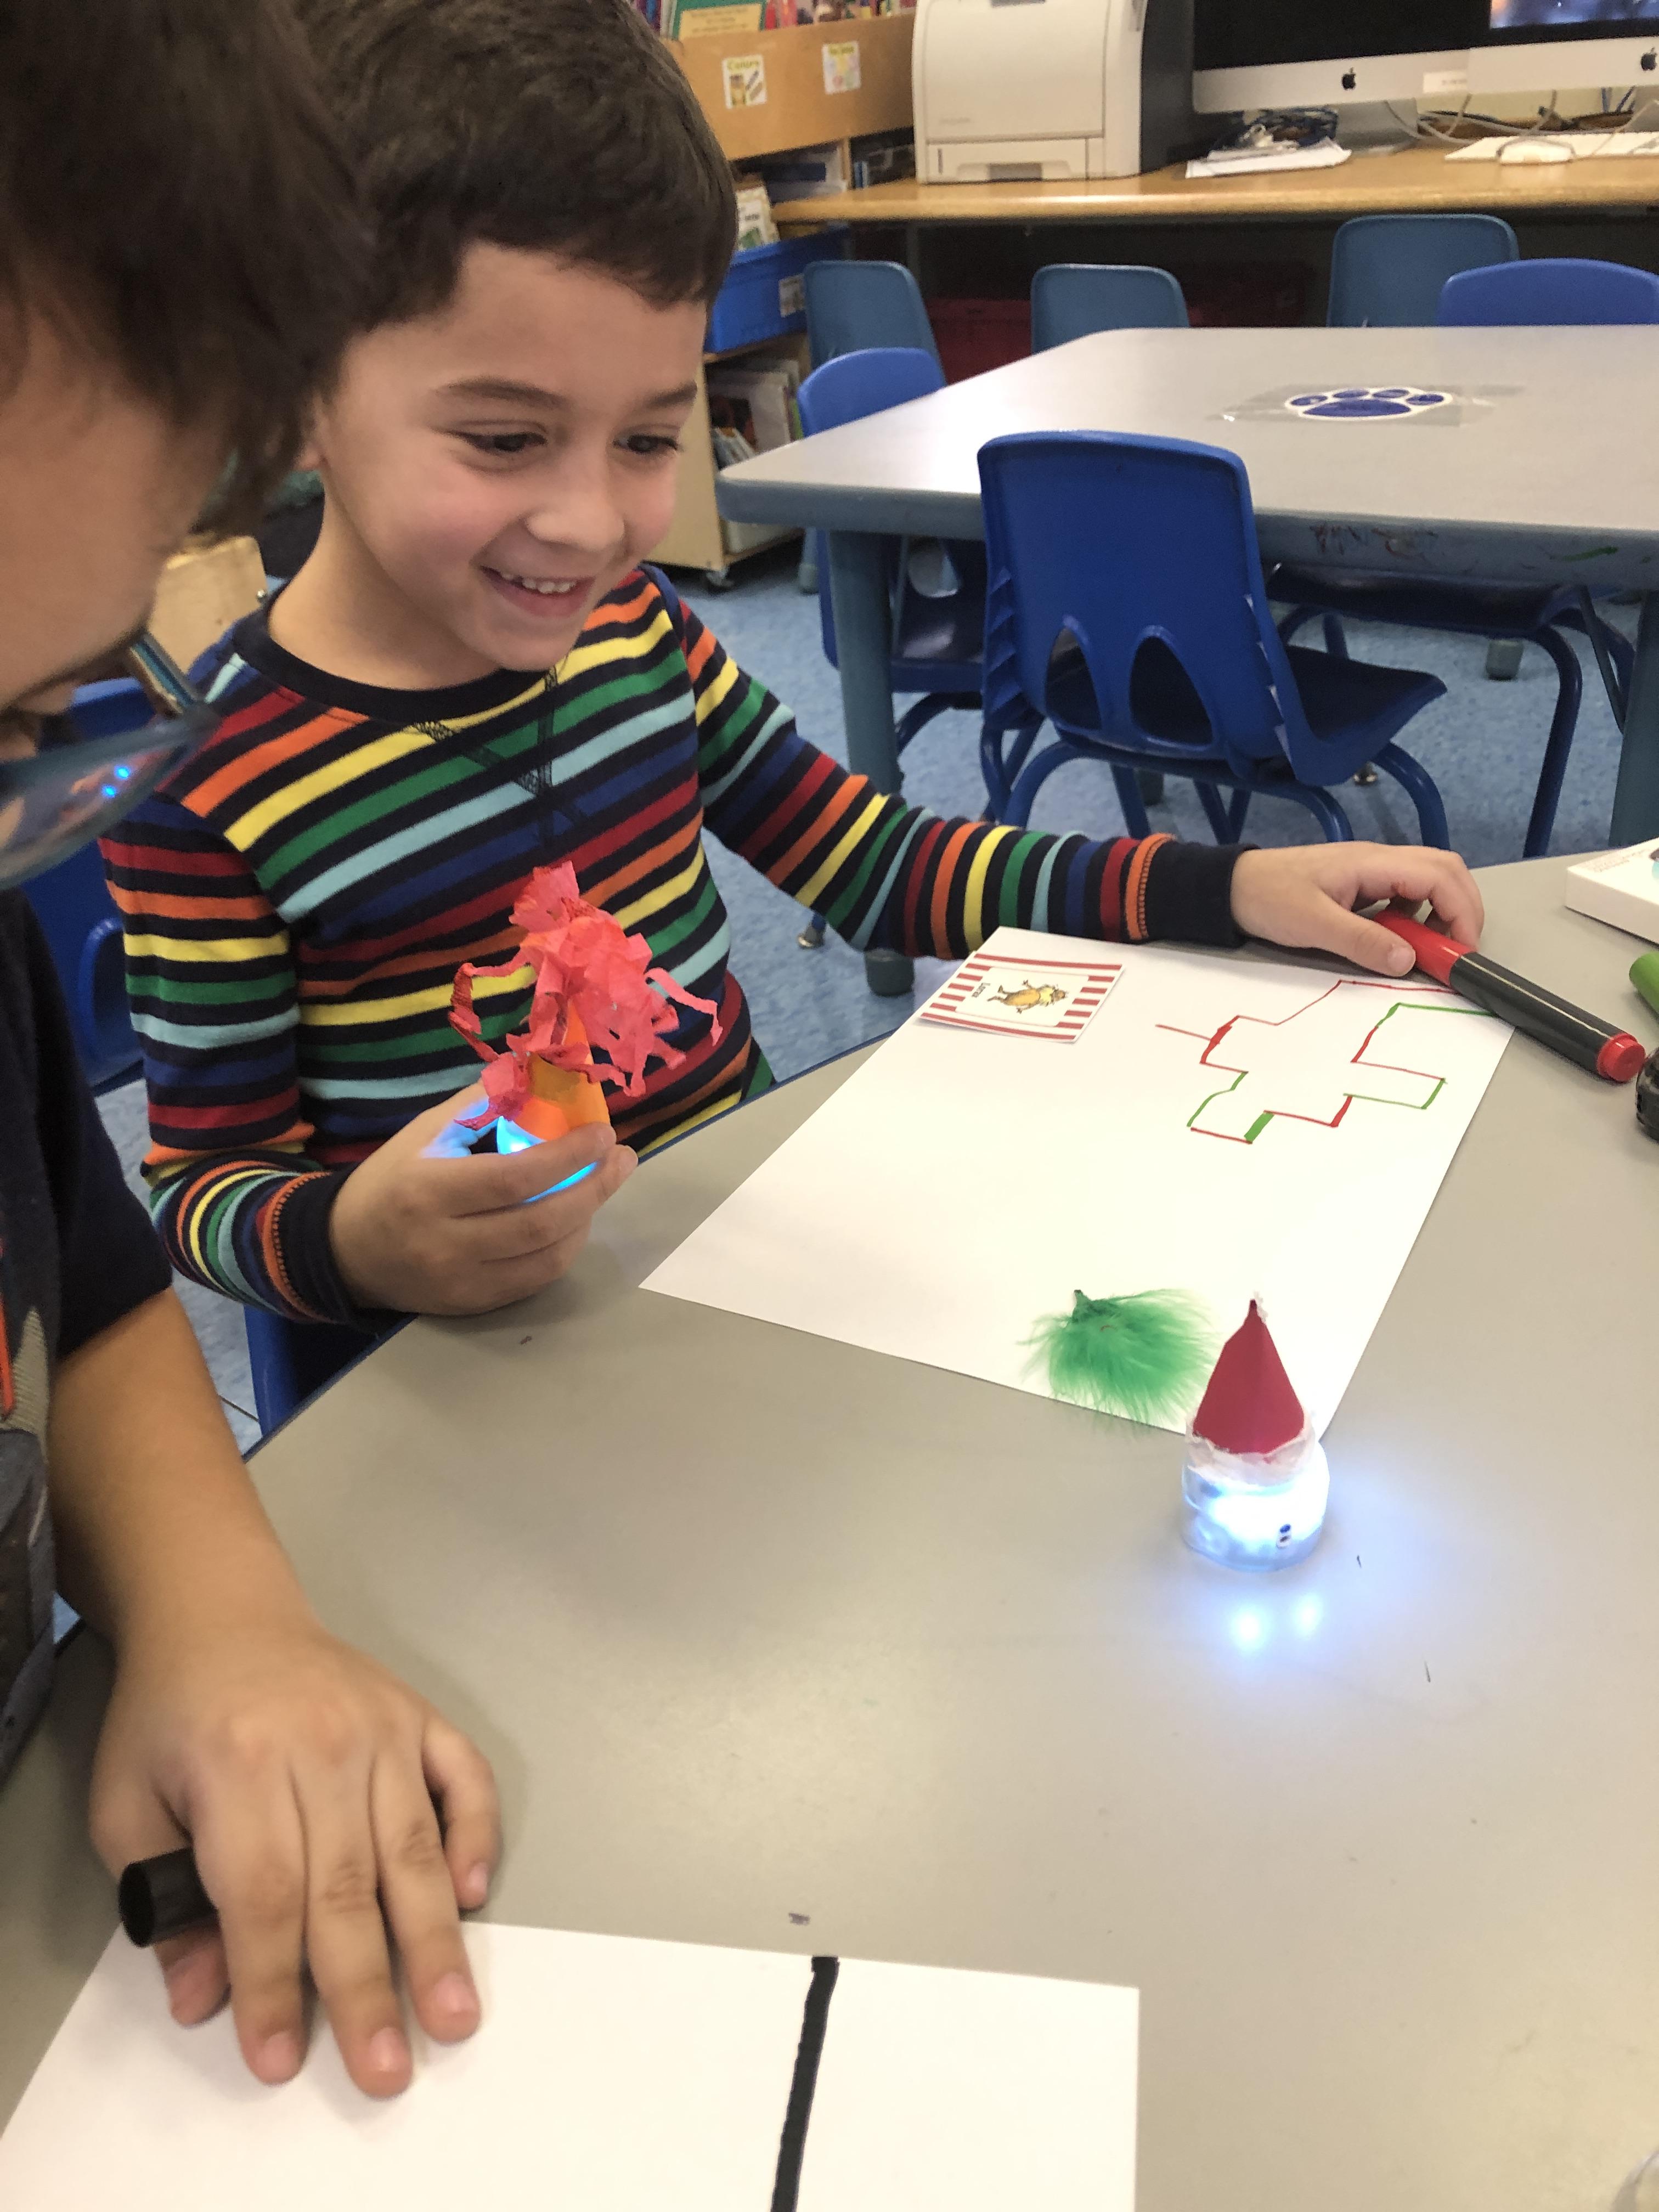  little boy holding ozobot in his hand as he plans its path